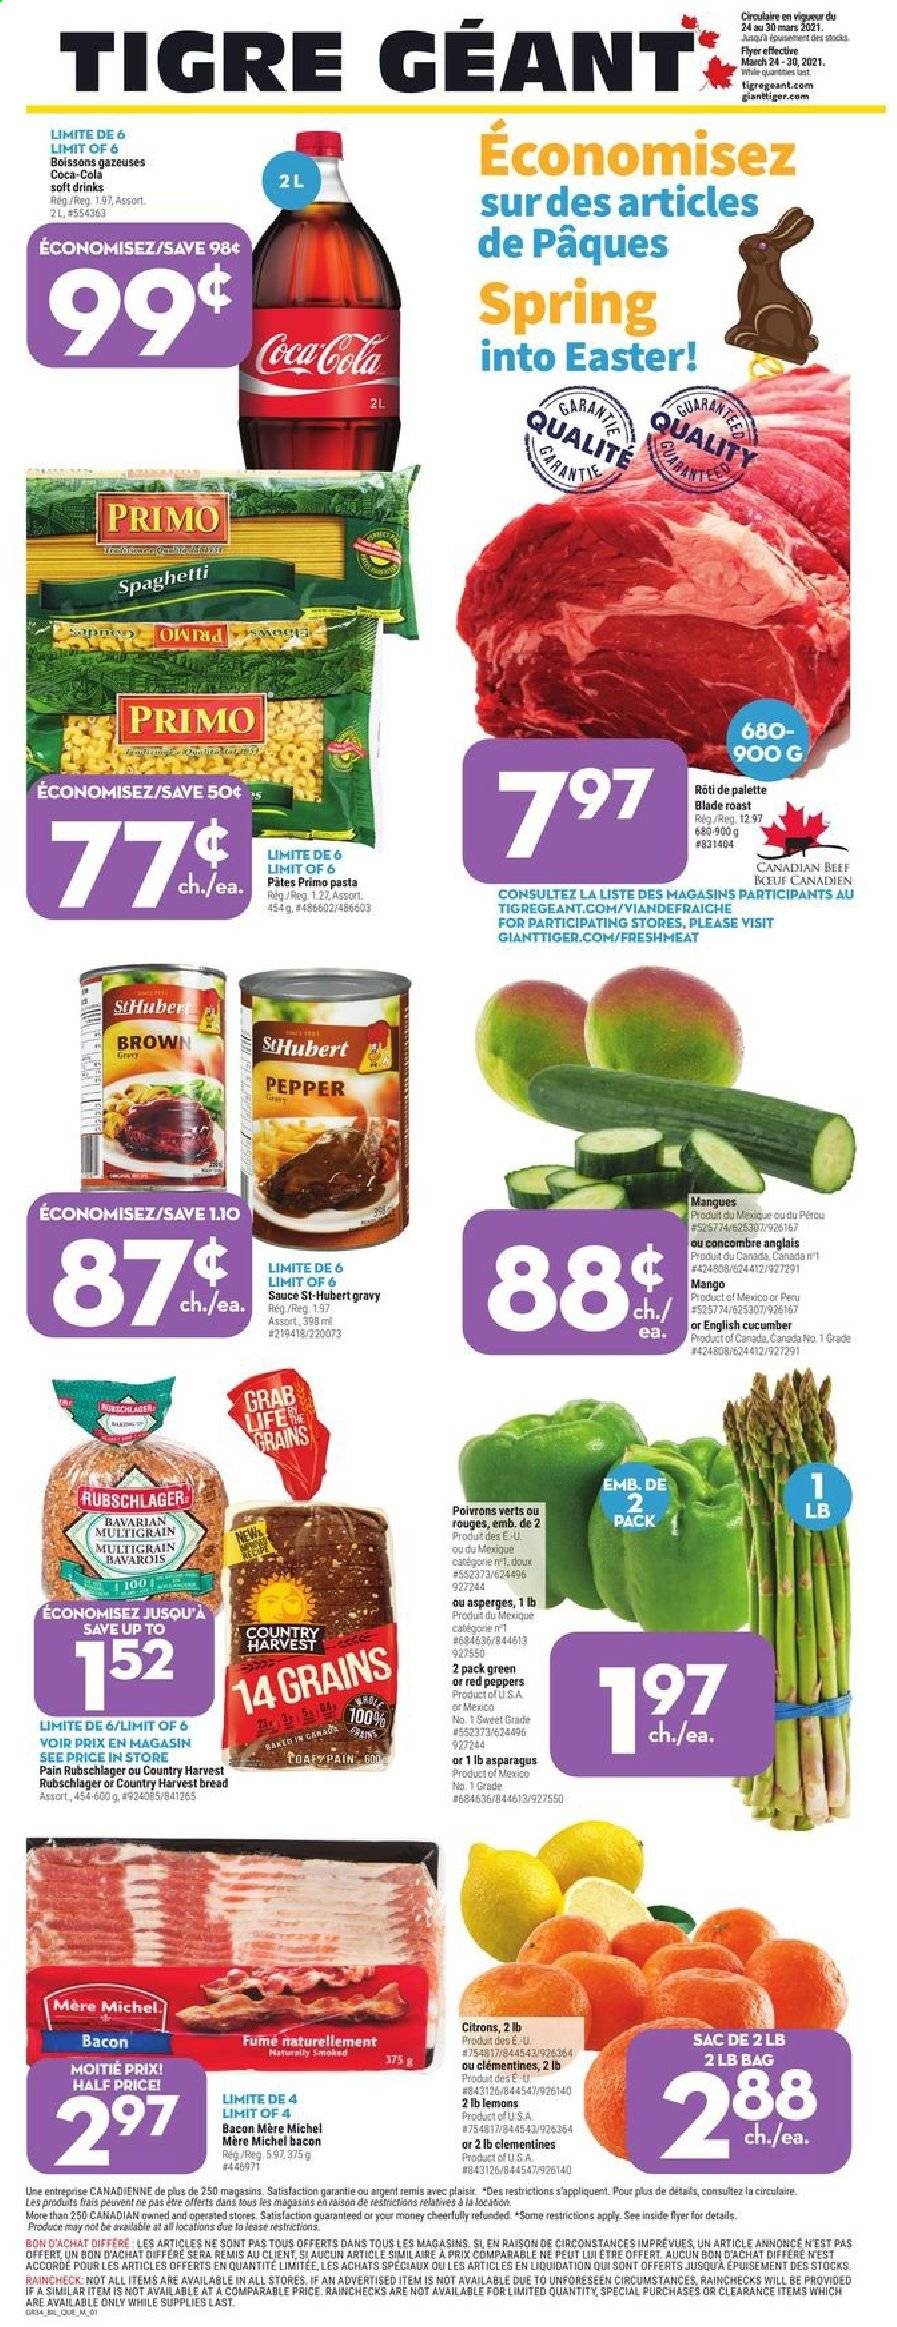 thumbnail - Giant Tiger Flyer - March 24, 2021 - March 30, 2021 - Sales products - bread, asparagus, peppers, red peppers, clementines, mango, spaghetti, pasta, sauce, bacon, Country Harvest, Mars, Coca-Cola, soft drink, bag, Palette. Page 1.